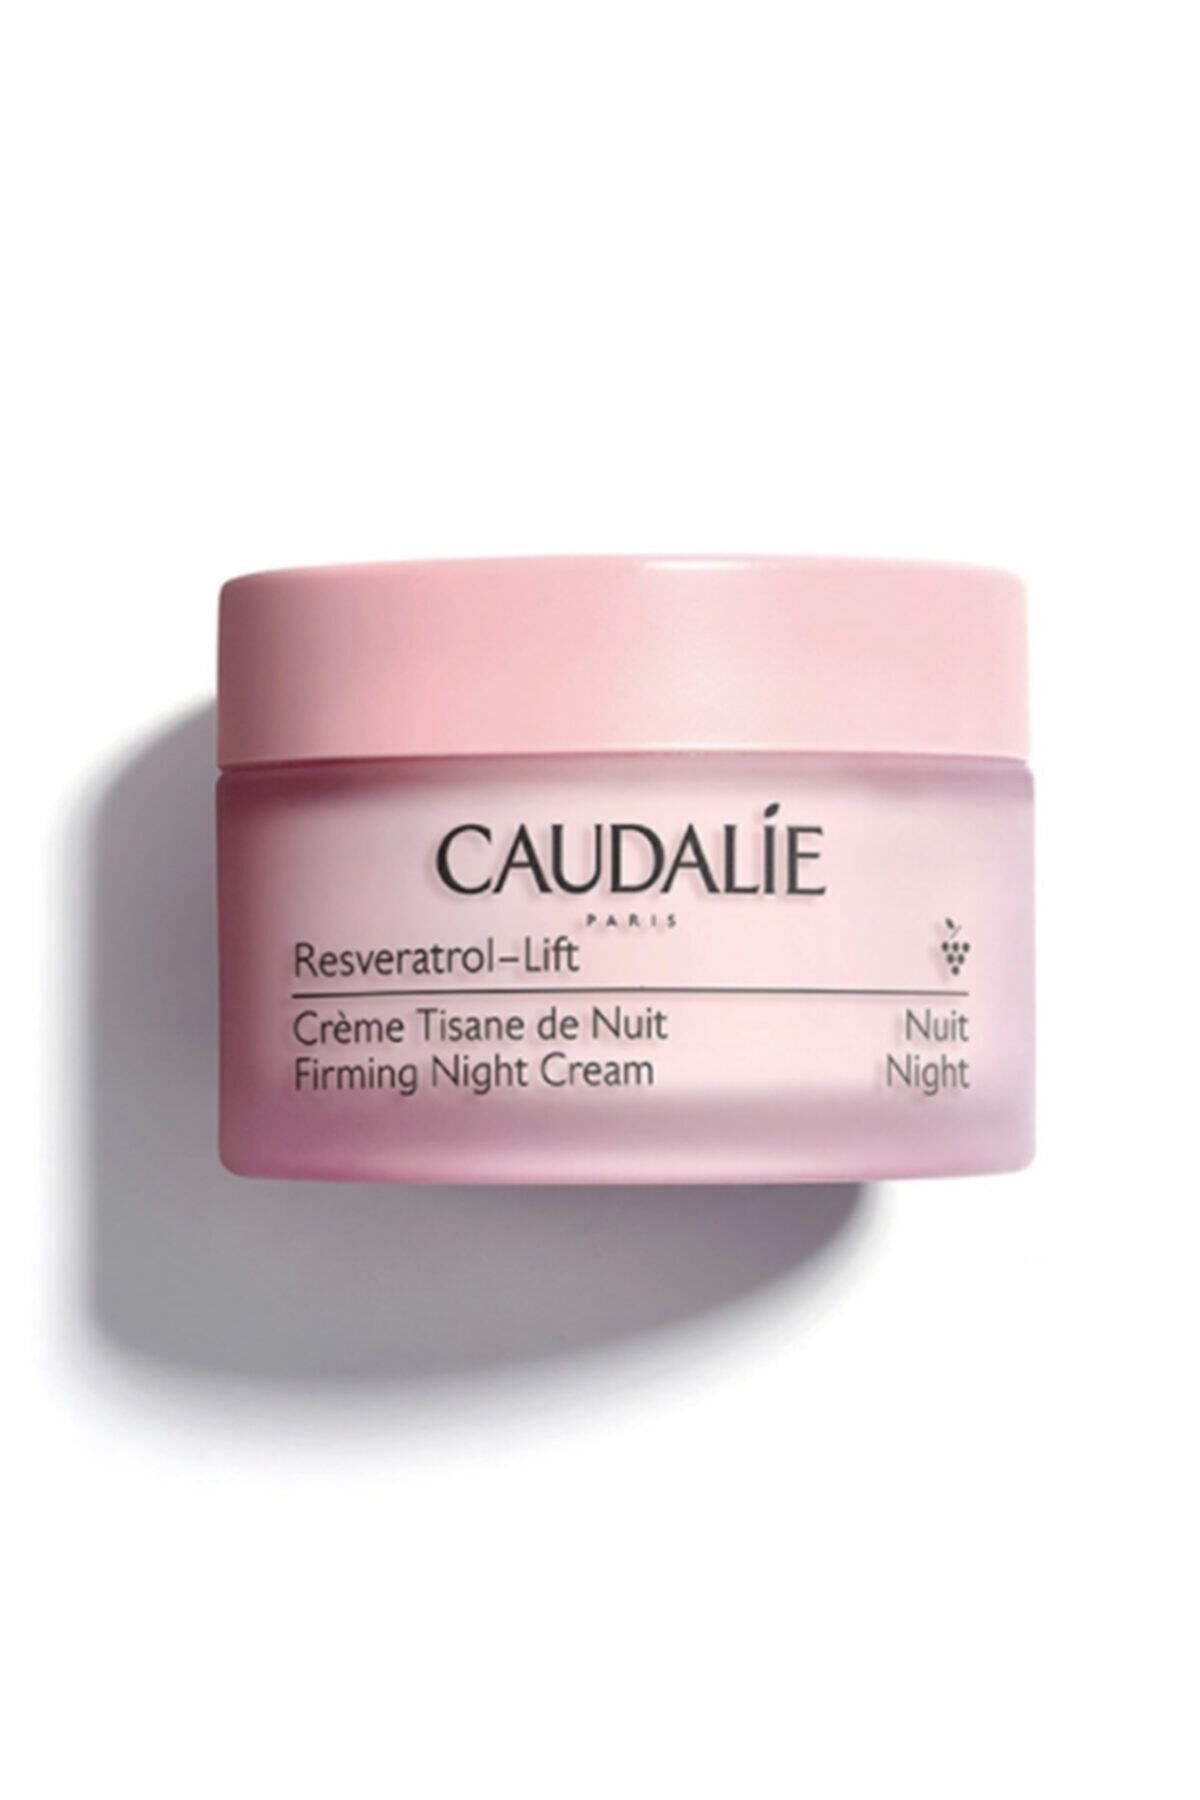 Caudalie Resveratrol Lift Night Infusion 50 Ml Night Cream with Firming Effect Shooting949